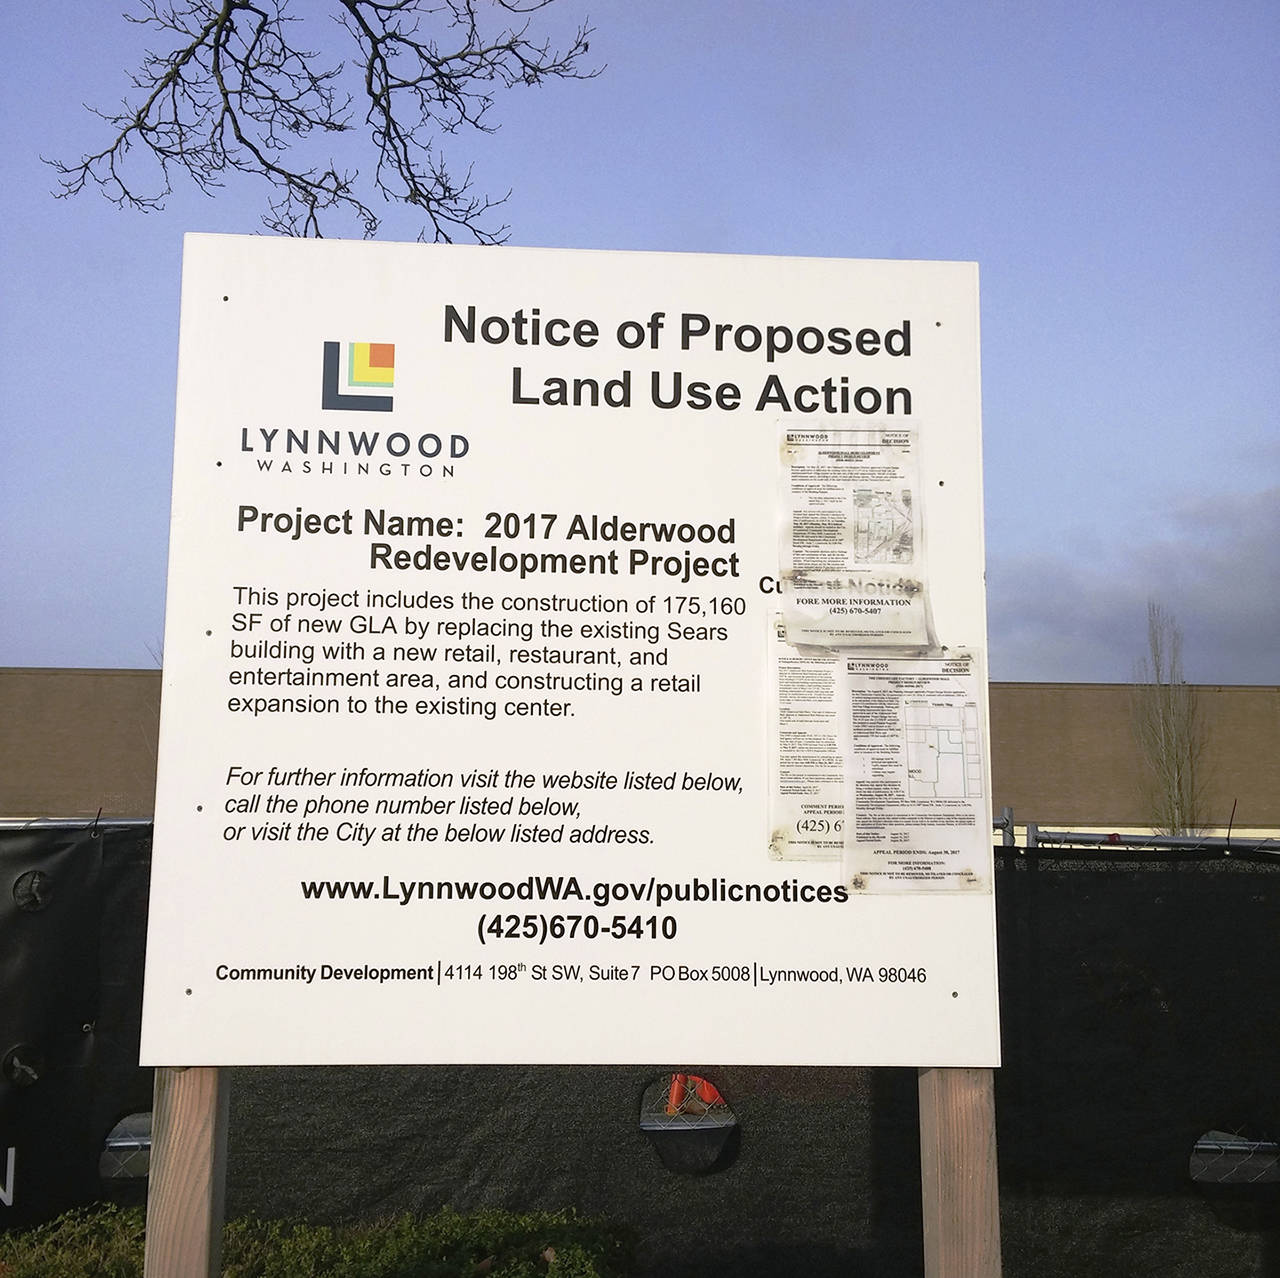 Construction is underway at the east end of Alderwood mall, where The Cheesecake Factory plans to open a location. (Rikki King / The Herald)